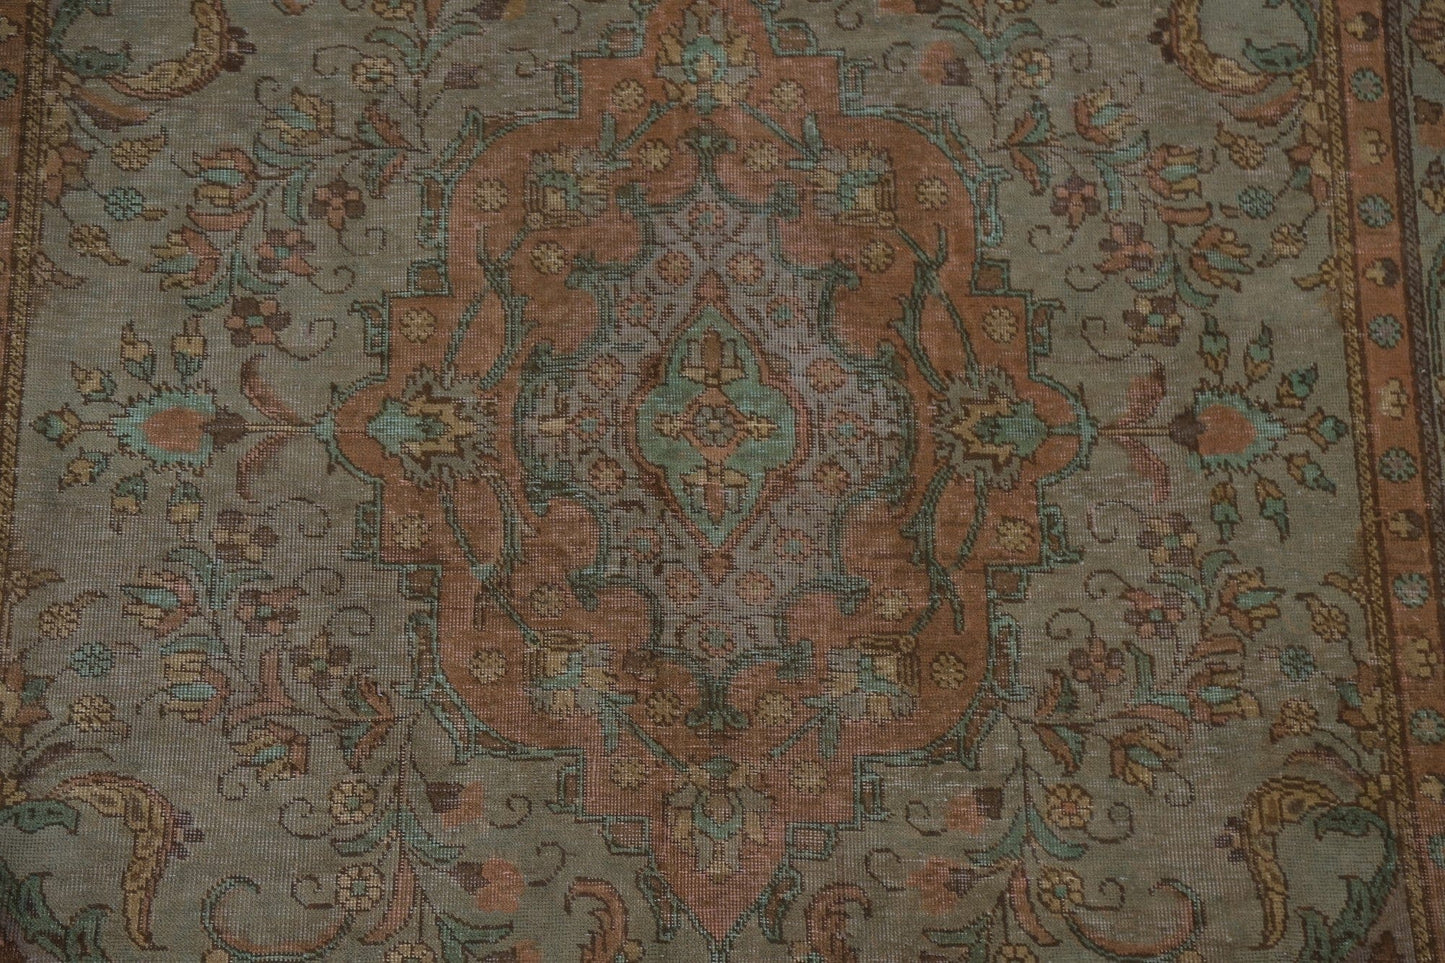 Over-Dyed Wool Tabriz Persian Area Rug 6x10